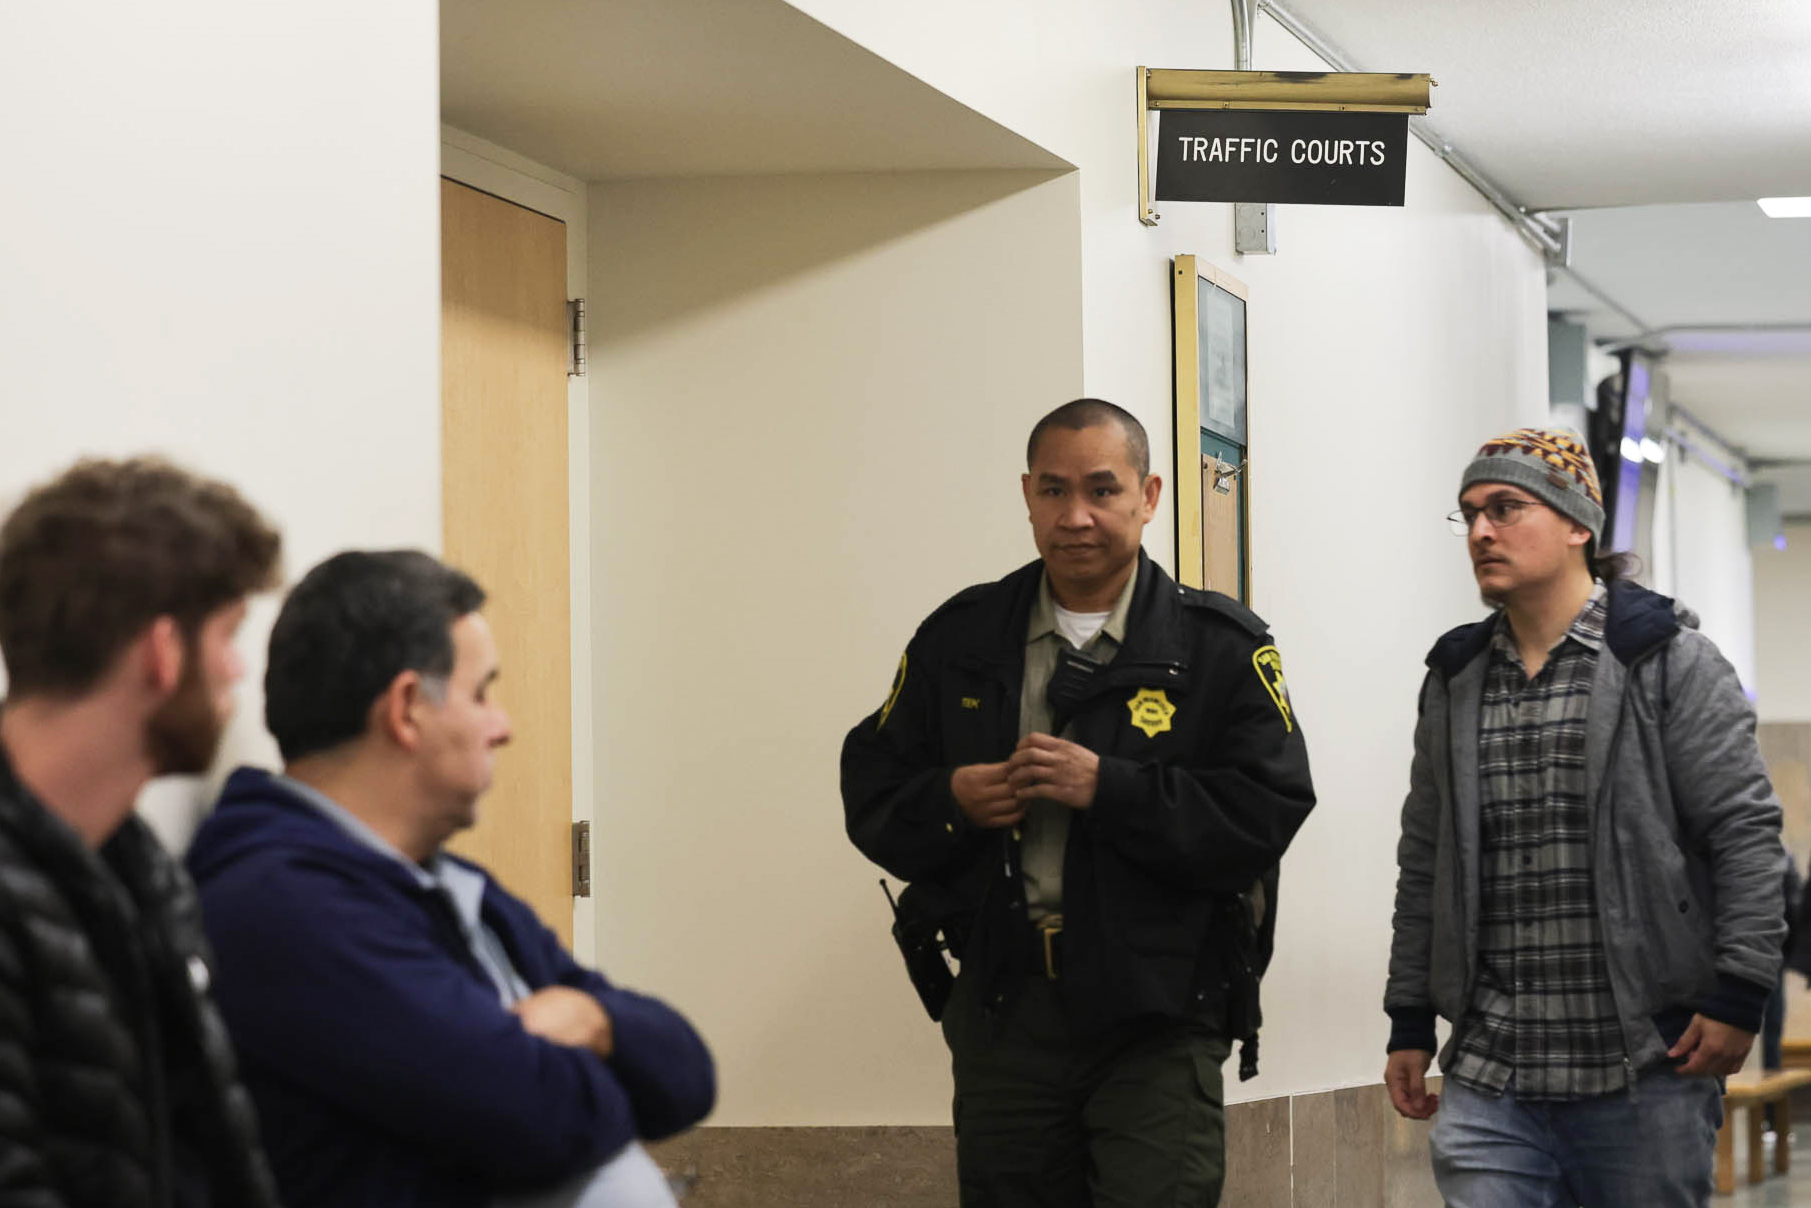 Three people look at a Sheriff's Department deputy standing outside a doorway.